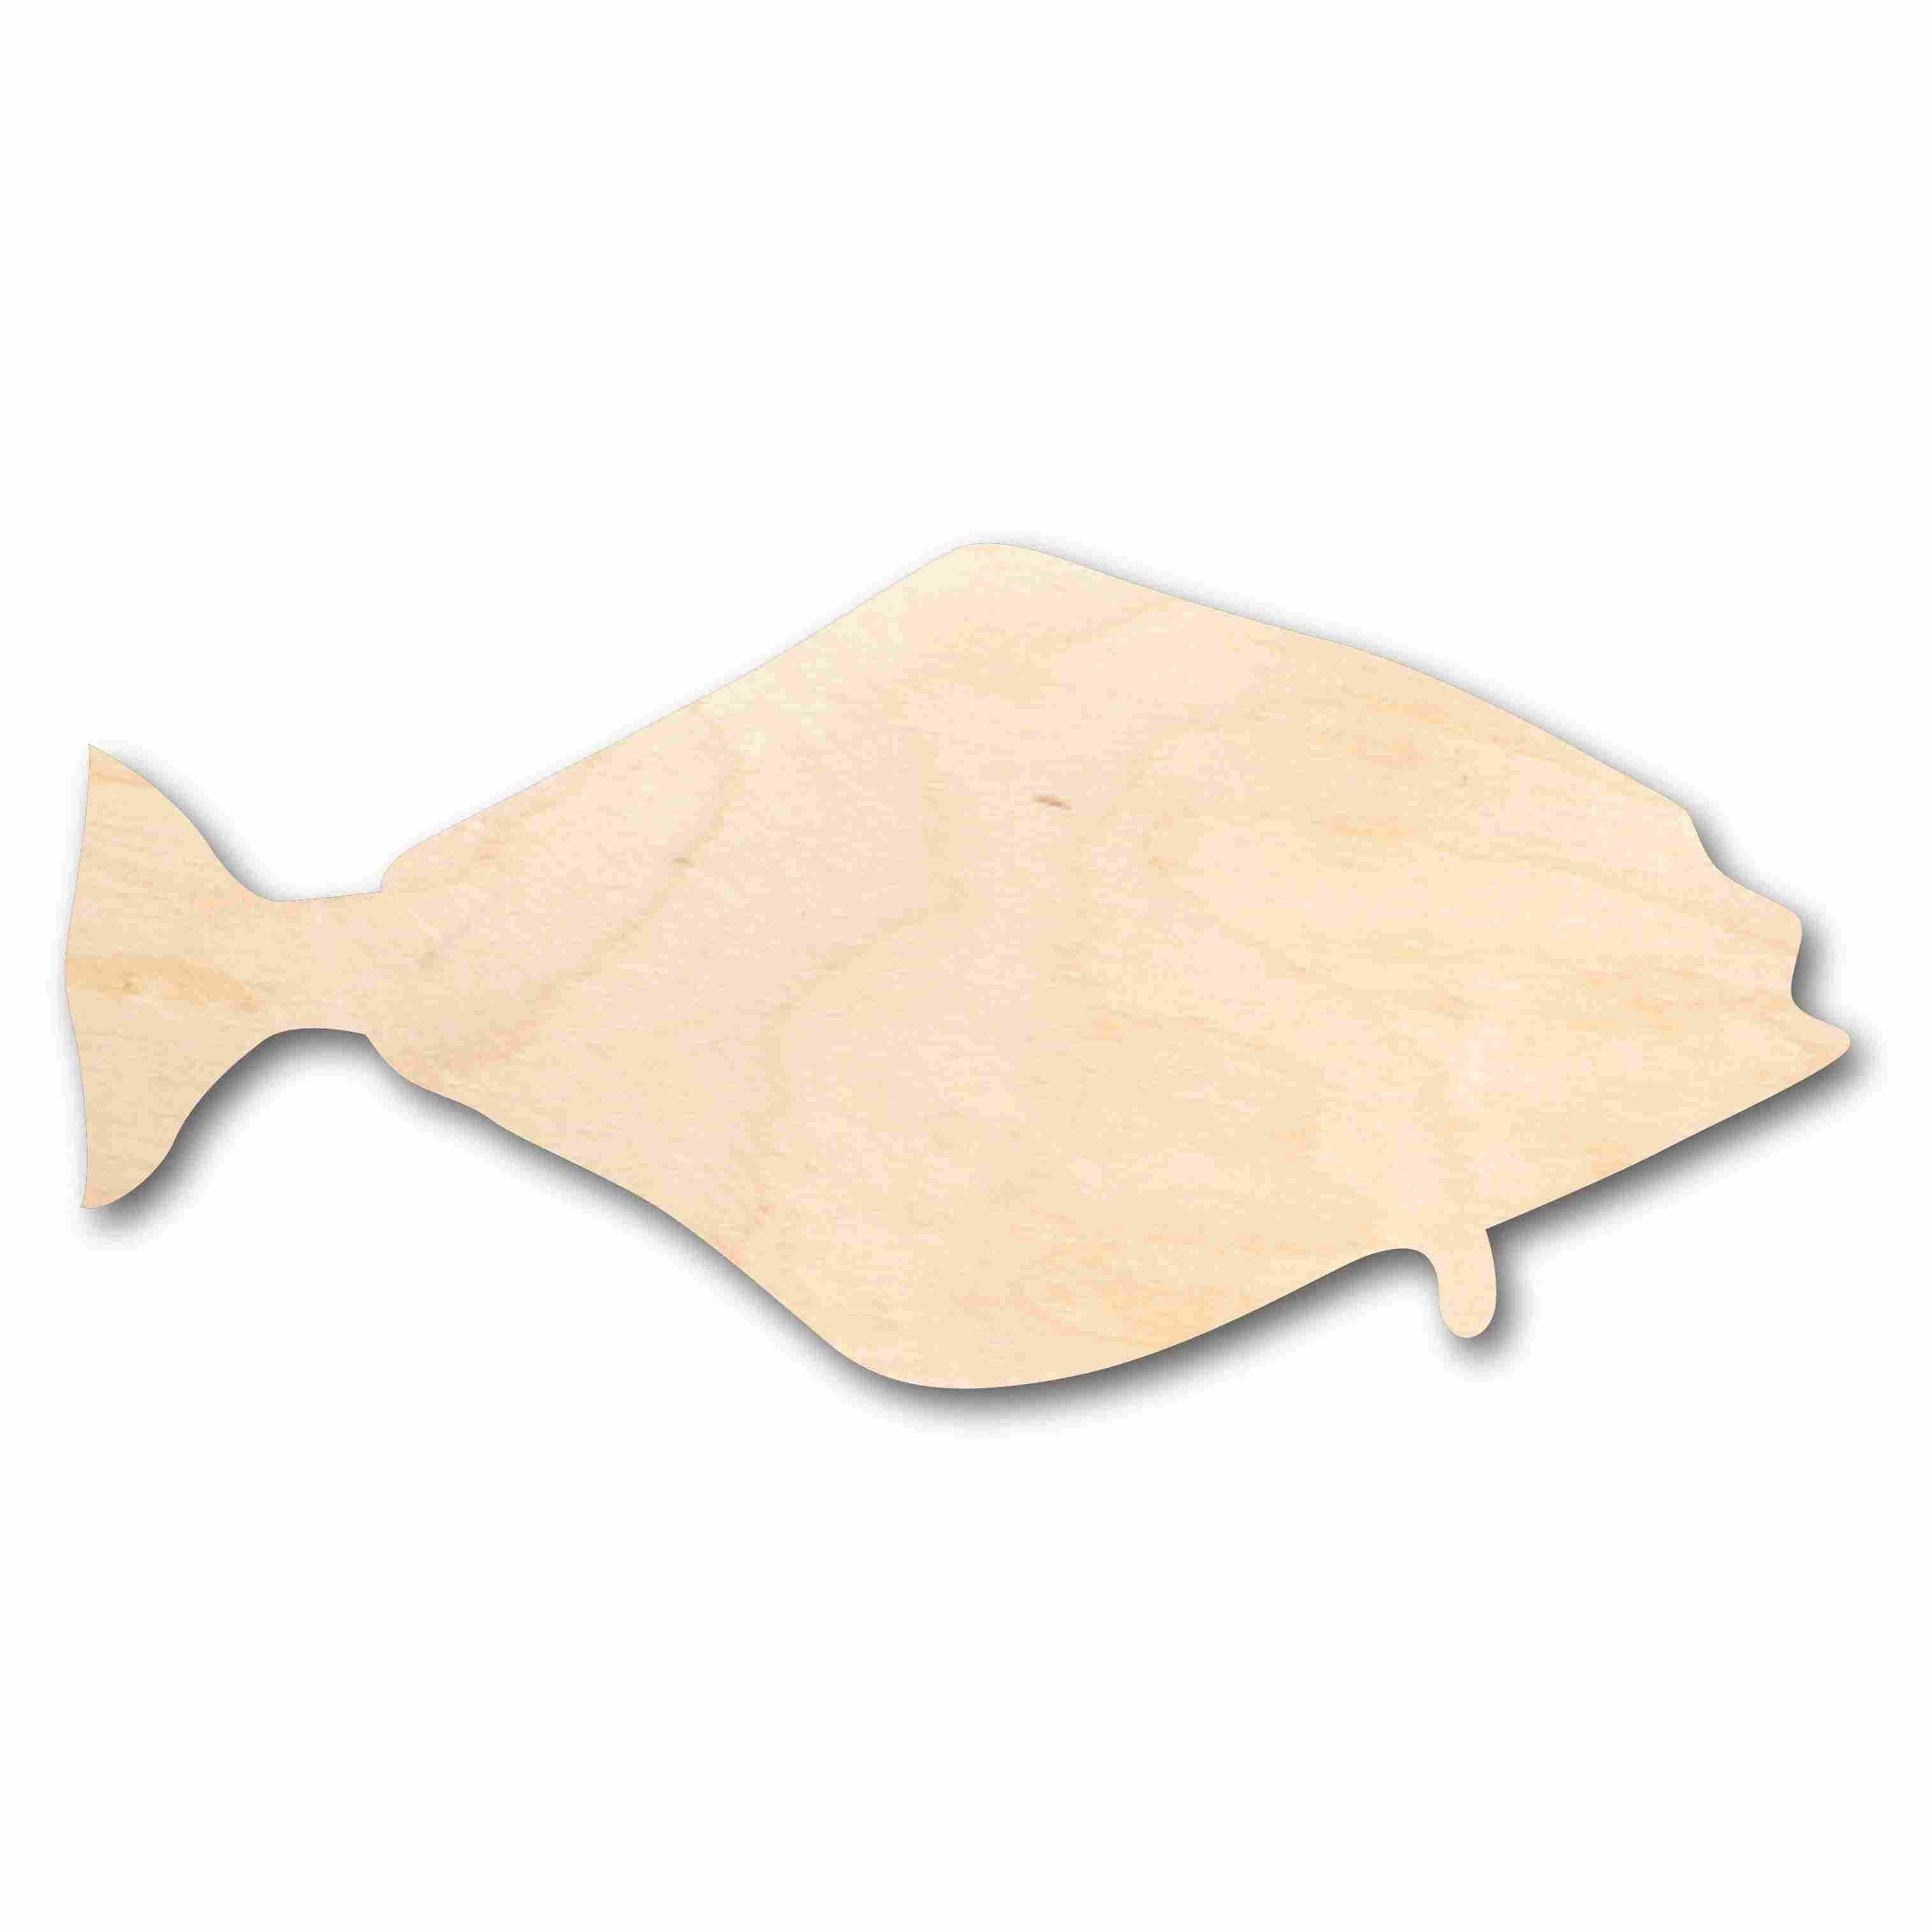 Unfinished Wood Halibut Fish Silhouette - Craft- up to 24